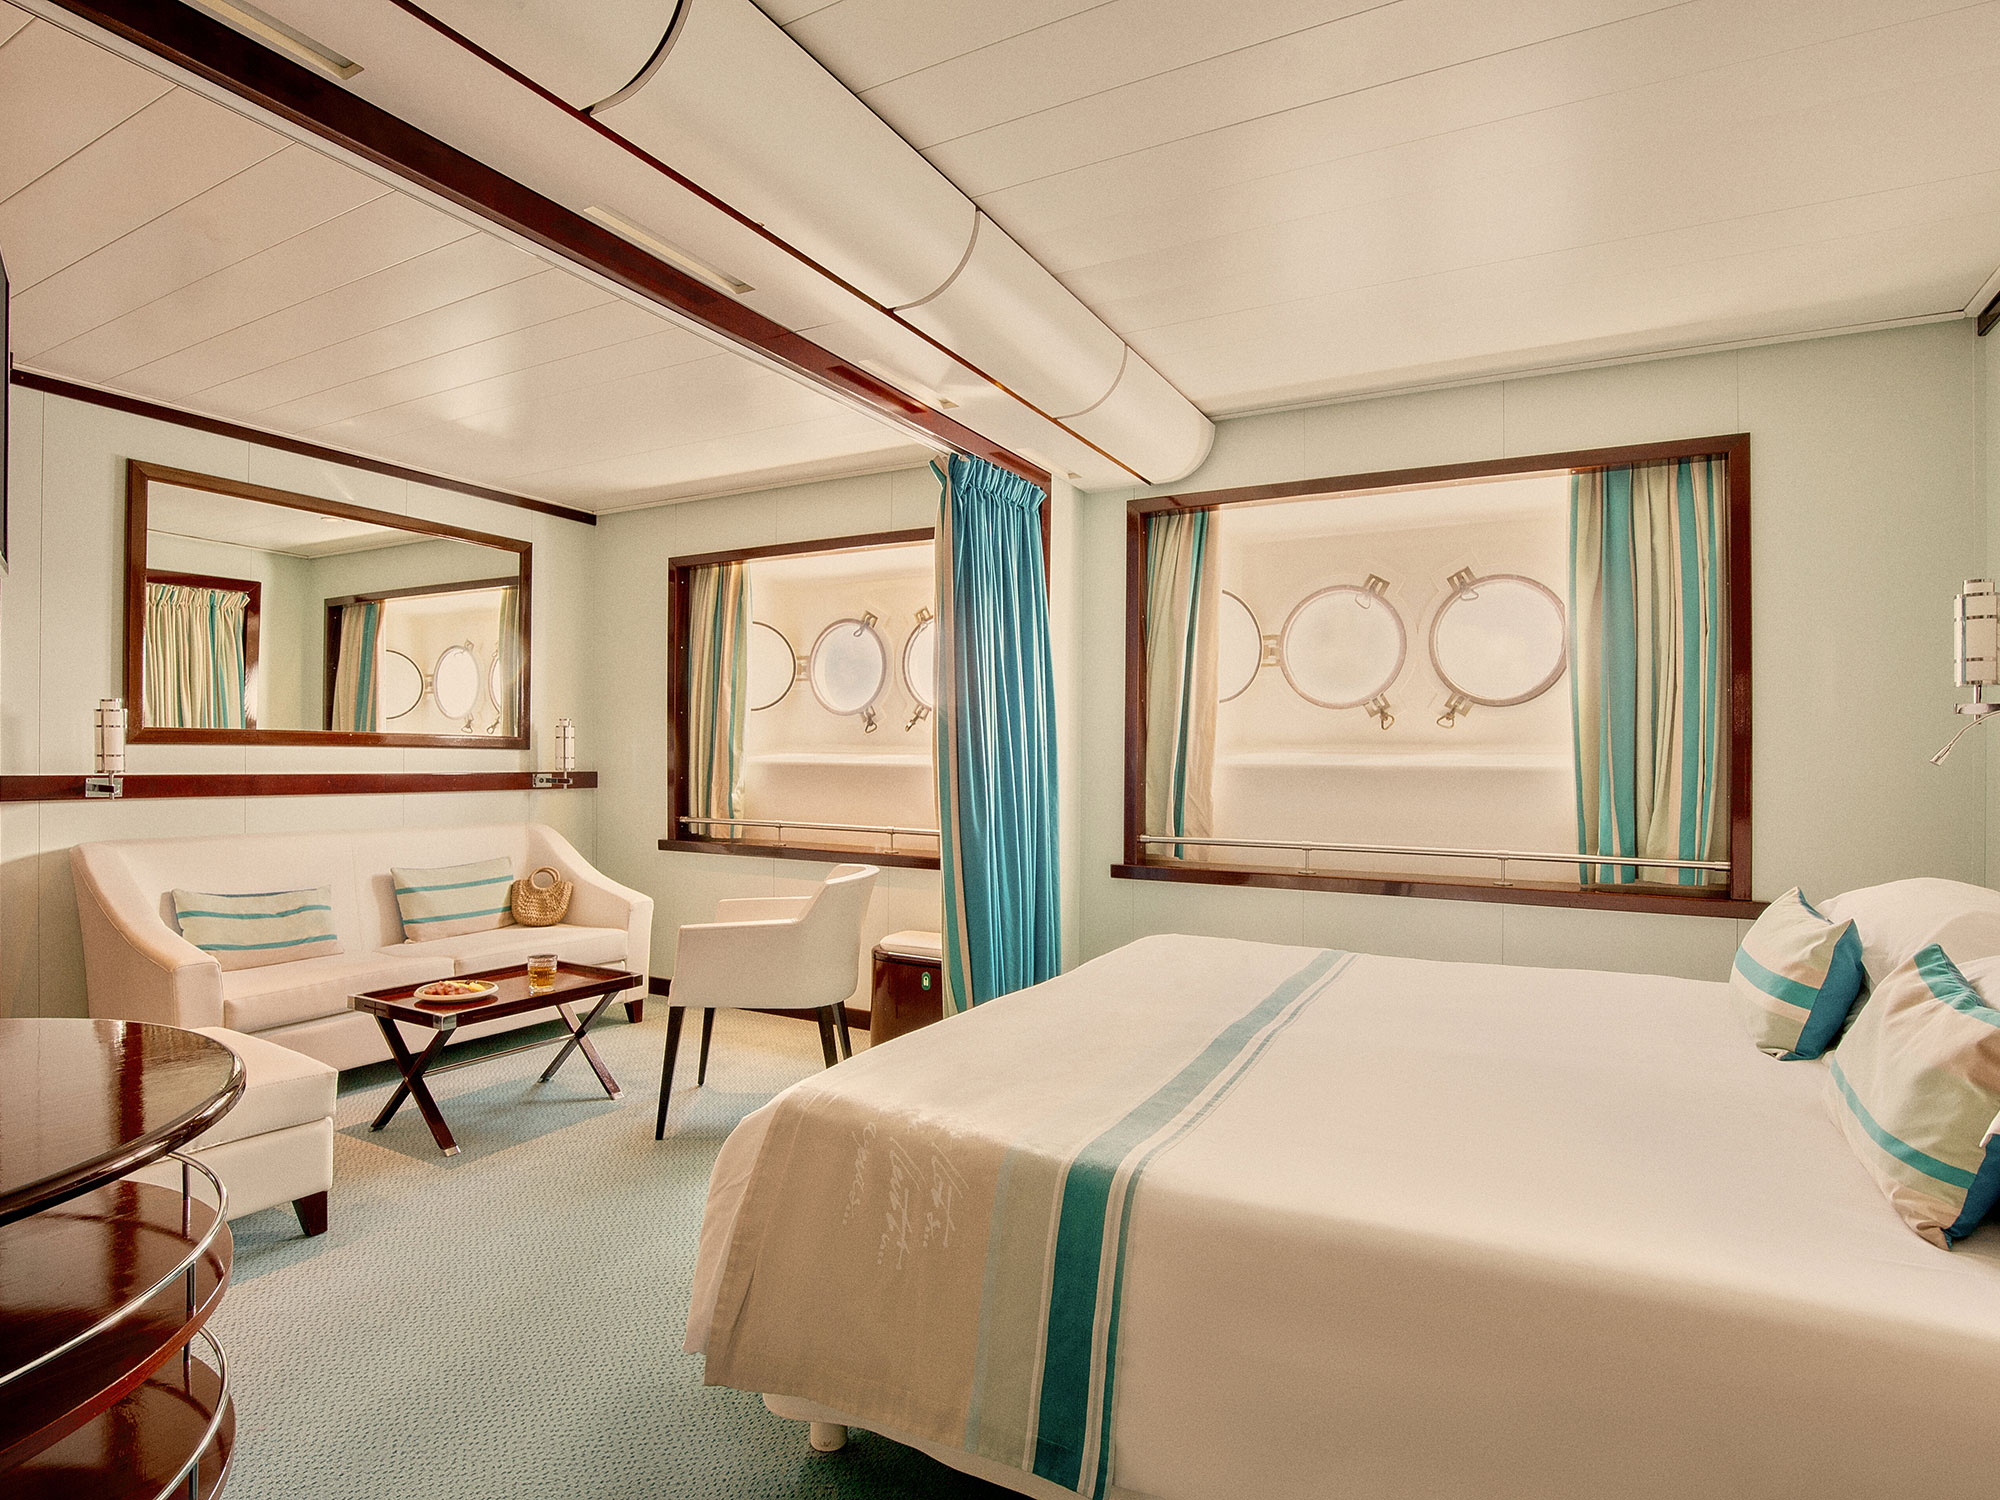 An interior view of a bedroom on the Club Med 2 luxury sailing yacht.